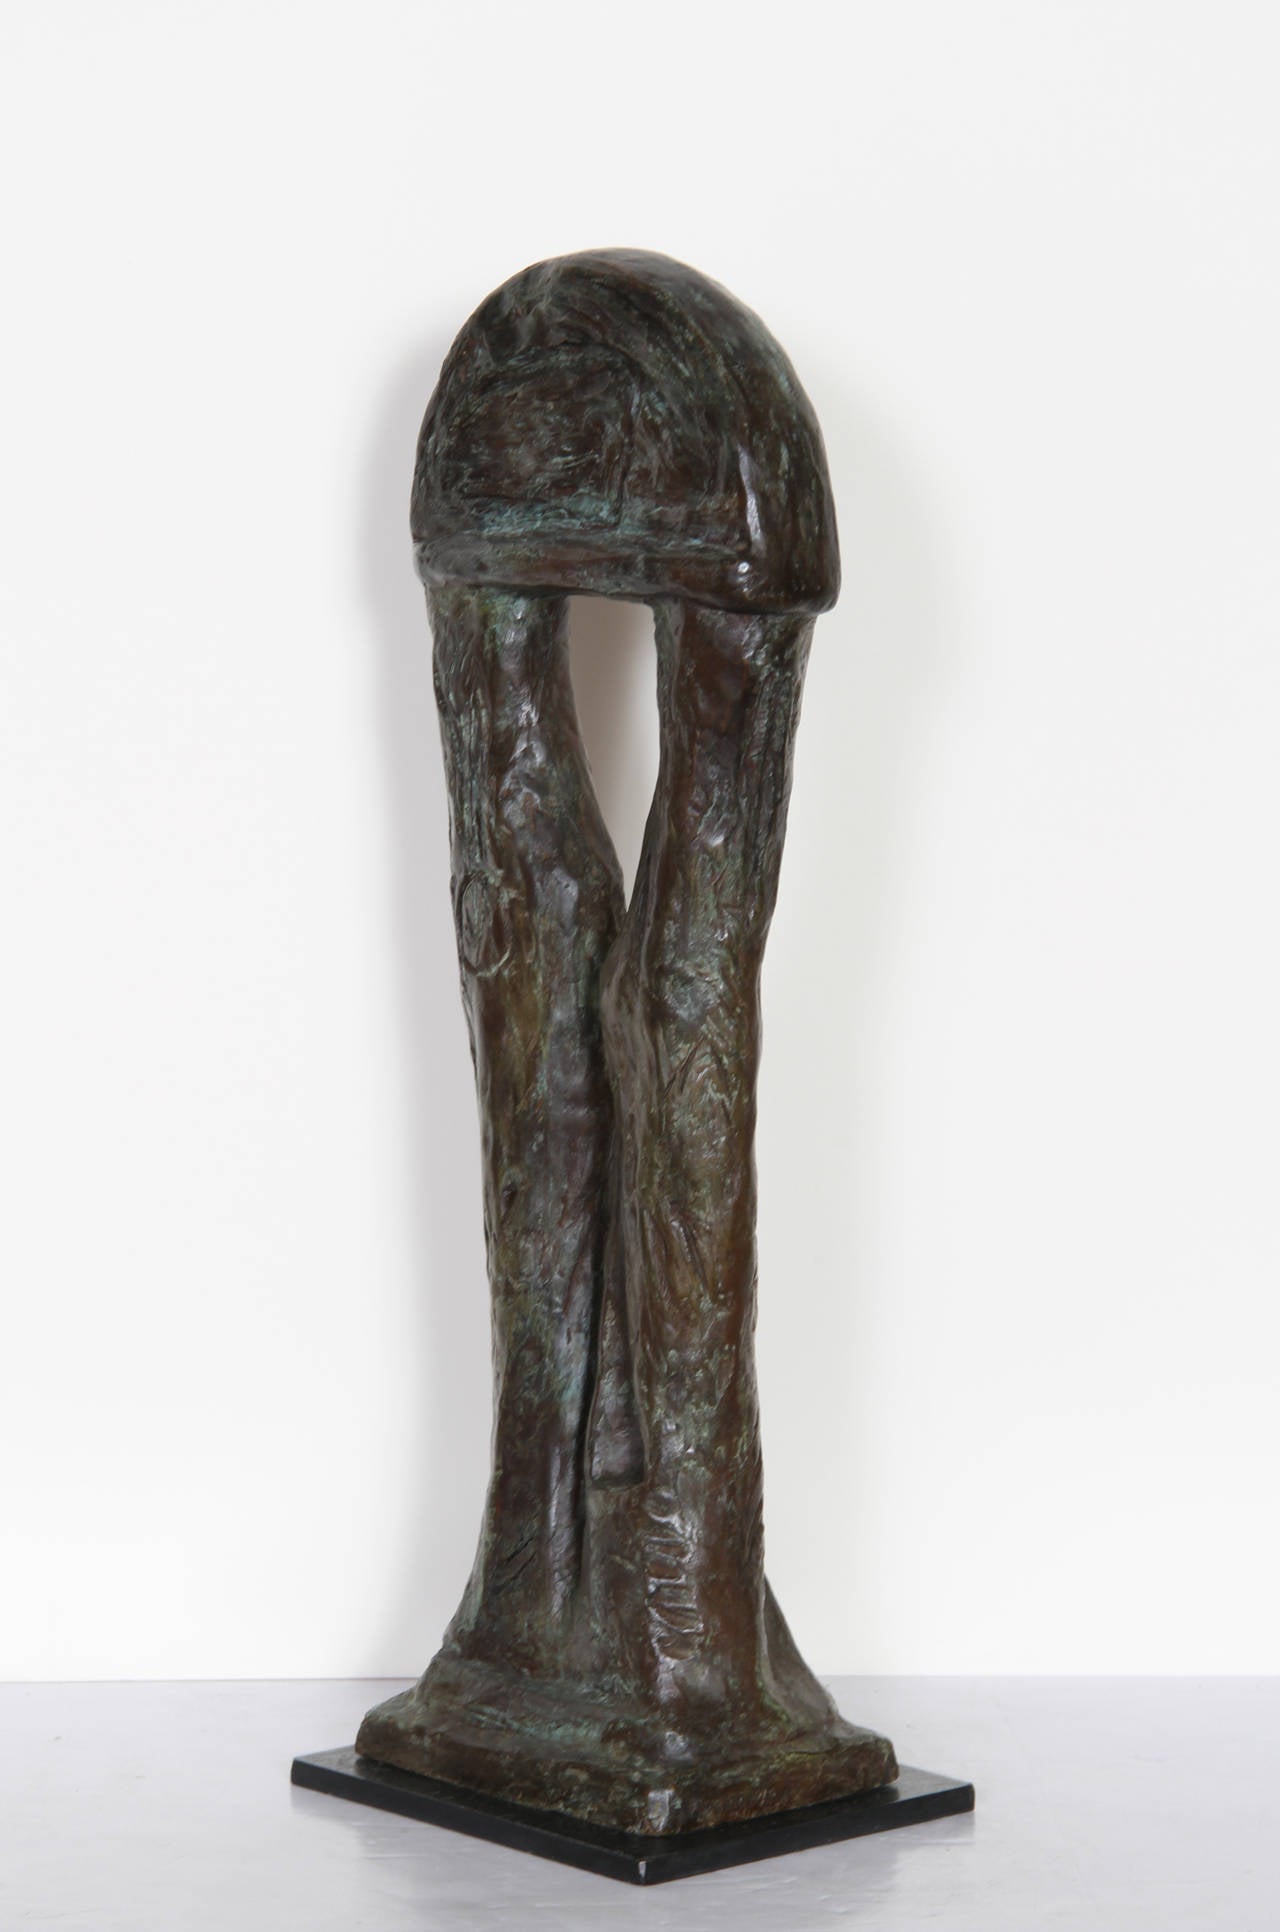 Artist: Thom Cooney-Crawford, American (1944 - )
Title: Four Earth Signs: Out of the Bronze Tree Lunette
Medium: Bronze Sculpture, signature and number inscribed
Edition: 4/5
Size: 20 in. x 6.5 in. x 4 in. (50.8 cm x 16.51 cm x 10.16 cm)